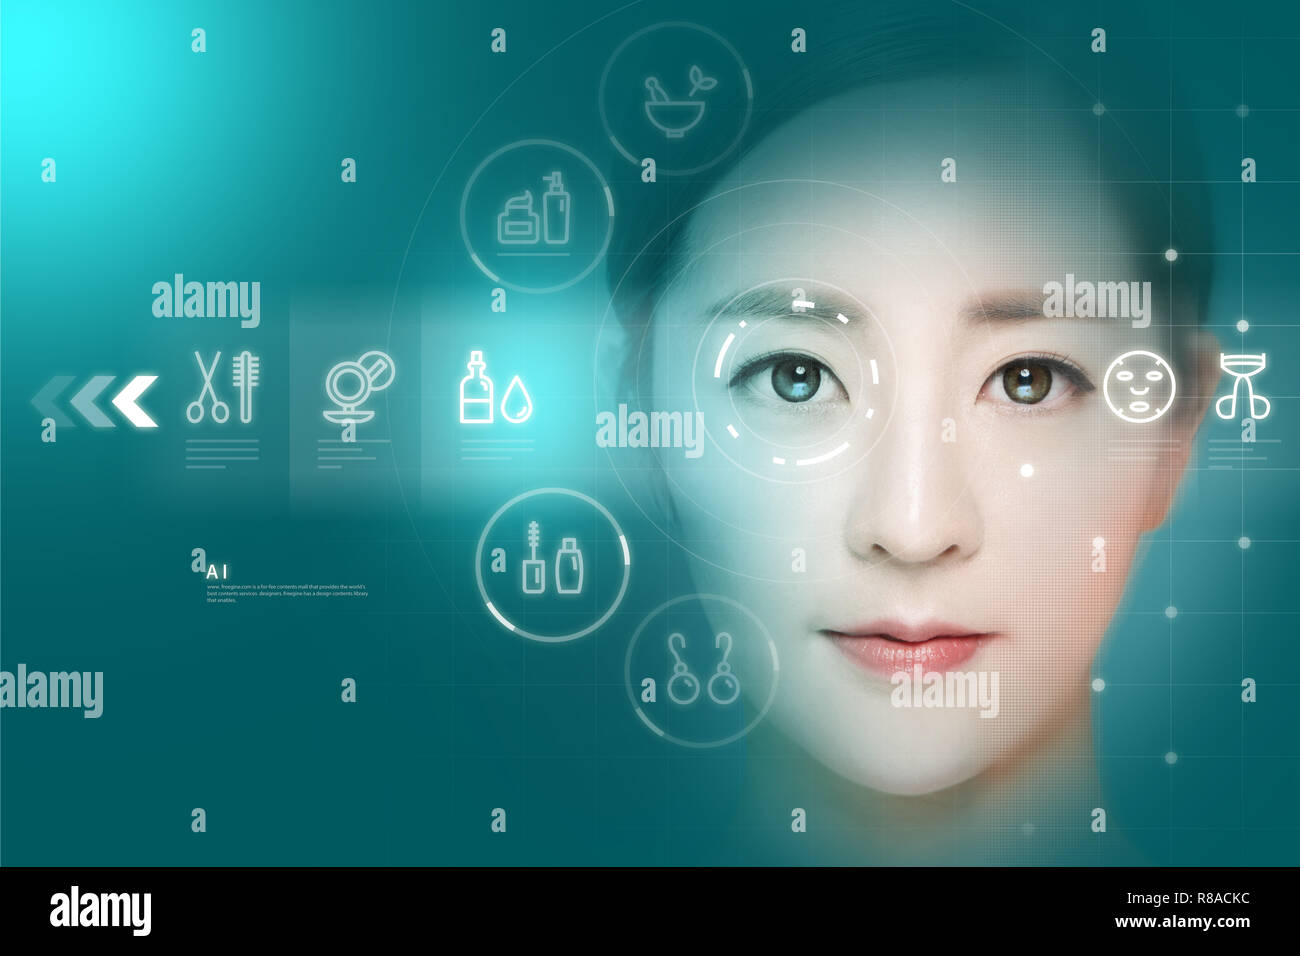 Artificial intelligence concept, Man and woman with future high tech smart glasses. 004 Stock Photo